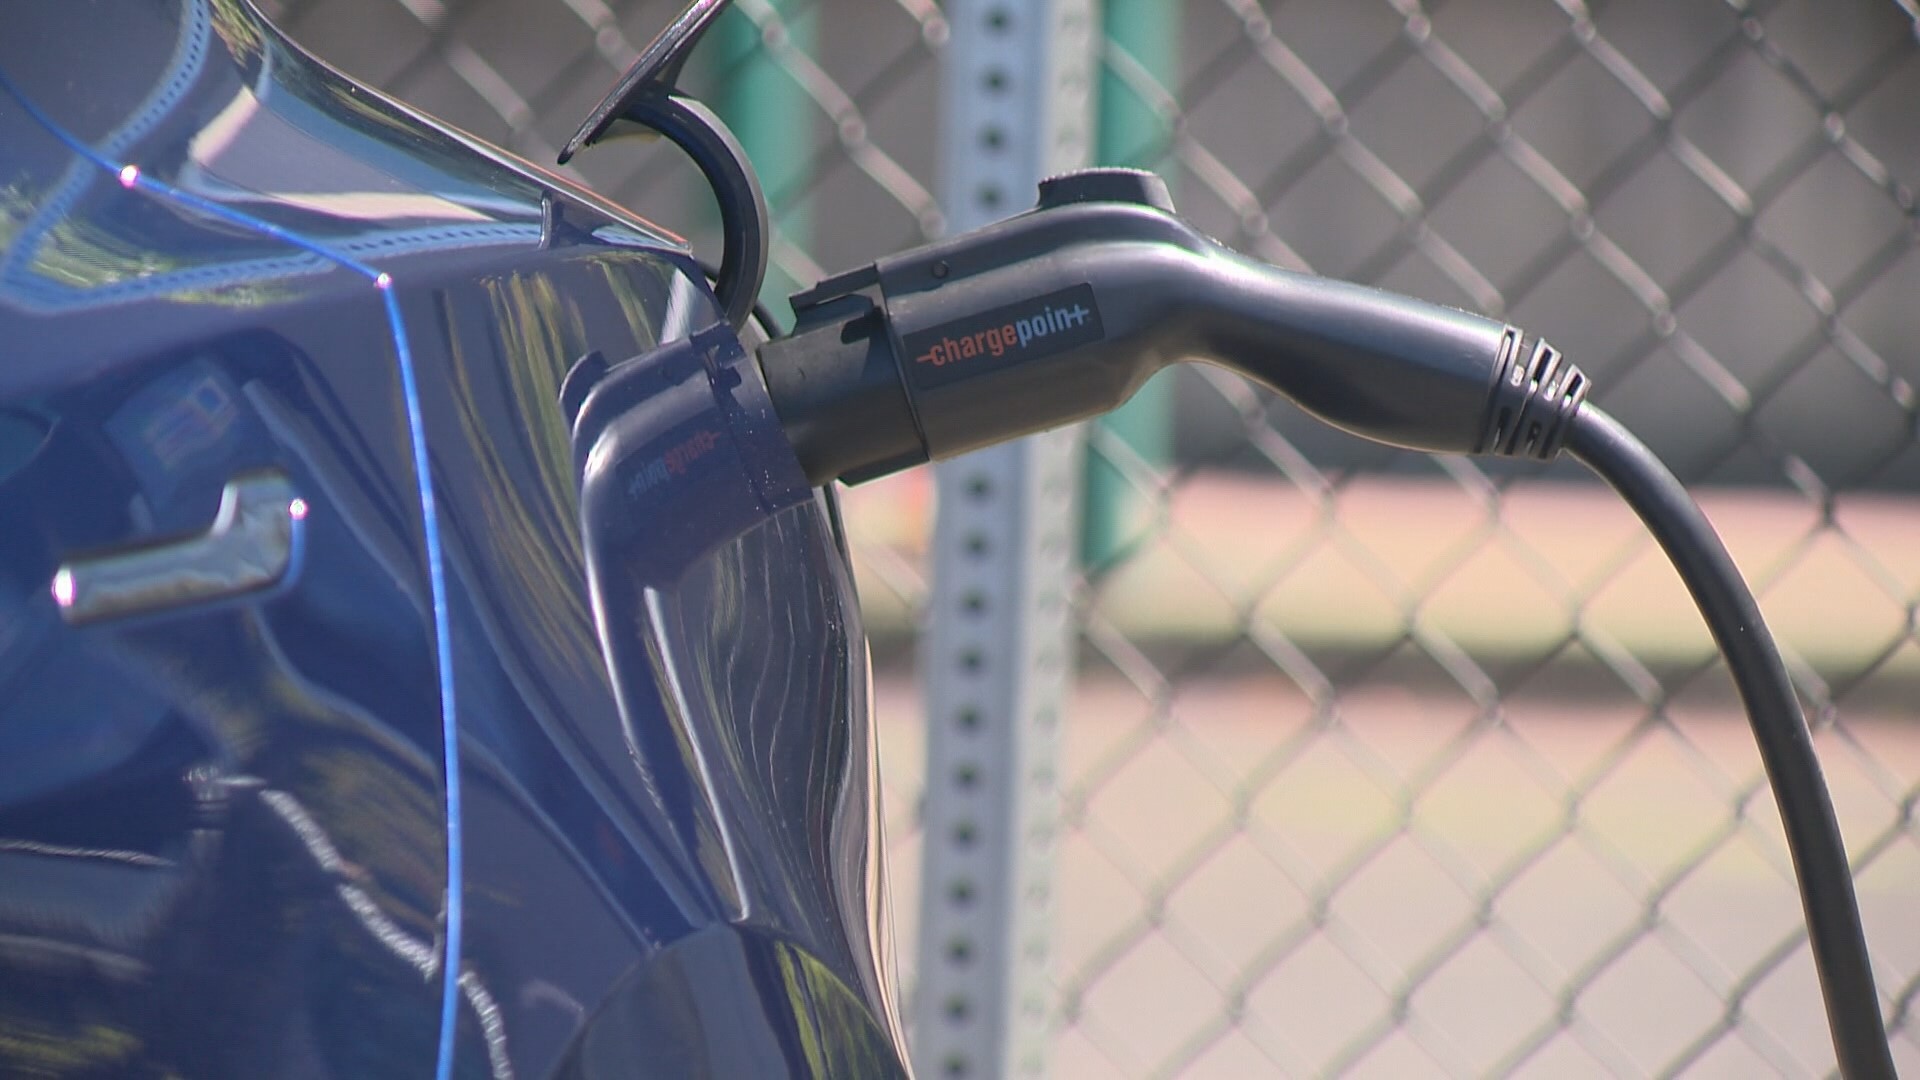 Portland General Electric's 'Drive Change' fund is helping the city of Gresham get 16 new electric vehicle charging stations for the public. Chris McGinness reports.